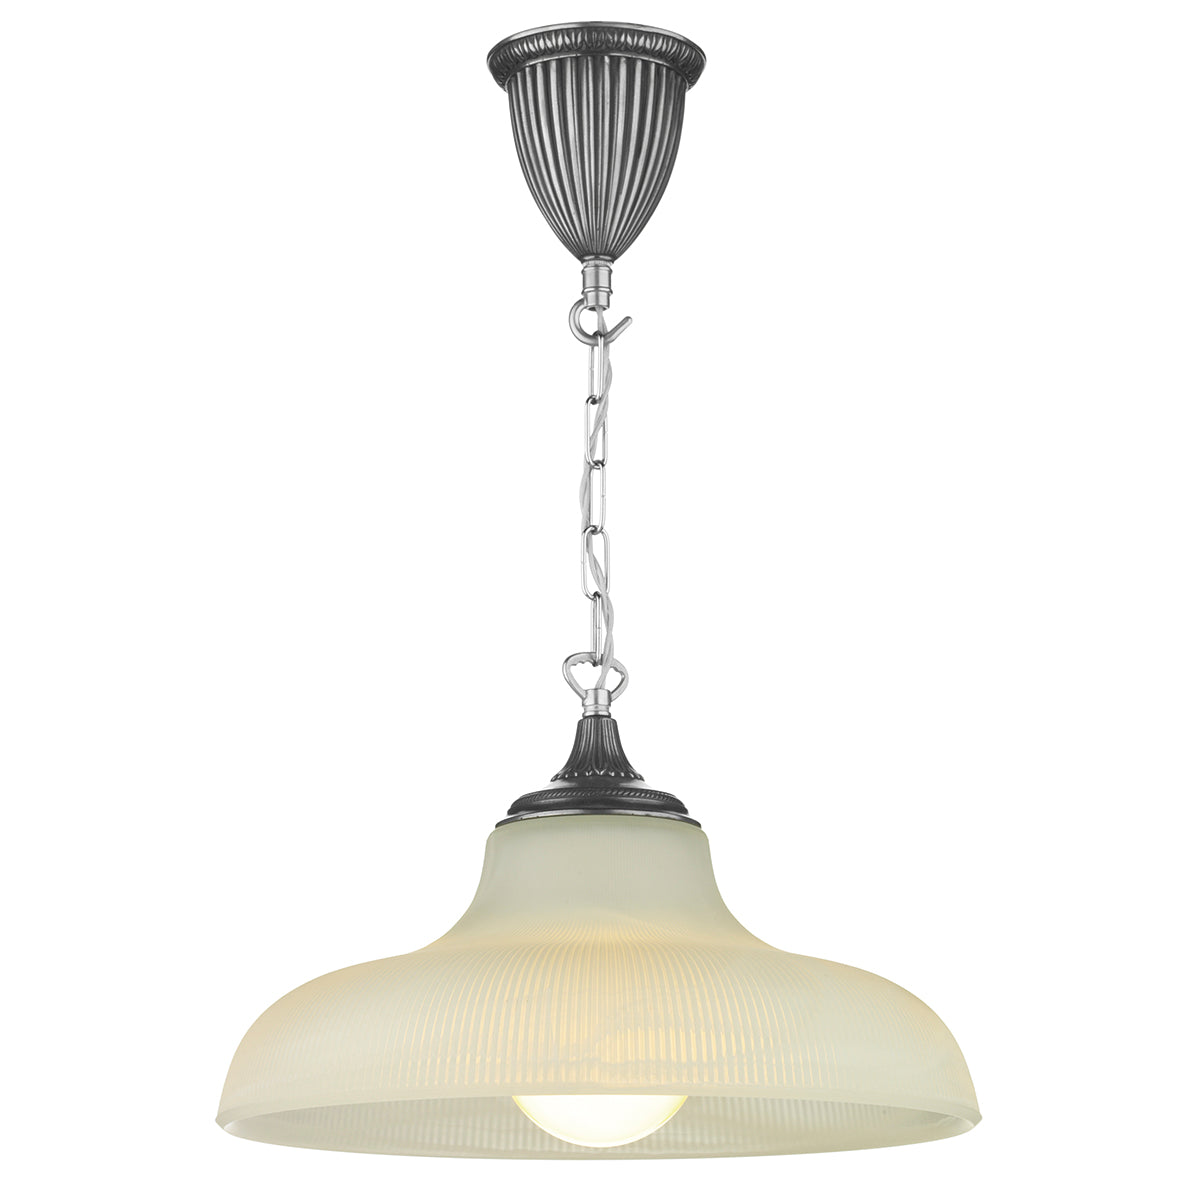 This pendant light has a large ceiling rose with a ribbed detail finished in a dark silver pewter colour, it has a chain hanging down with a creamy alabaster glass that is circular and ribbed its a thick heavy glass that is shallow and wide so you will see the bulb pointing out underneath.